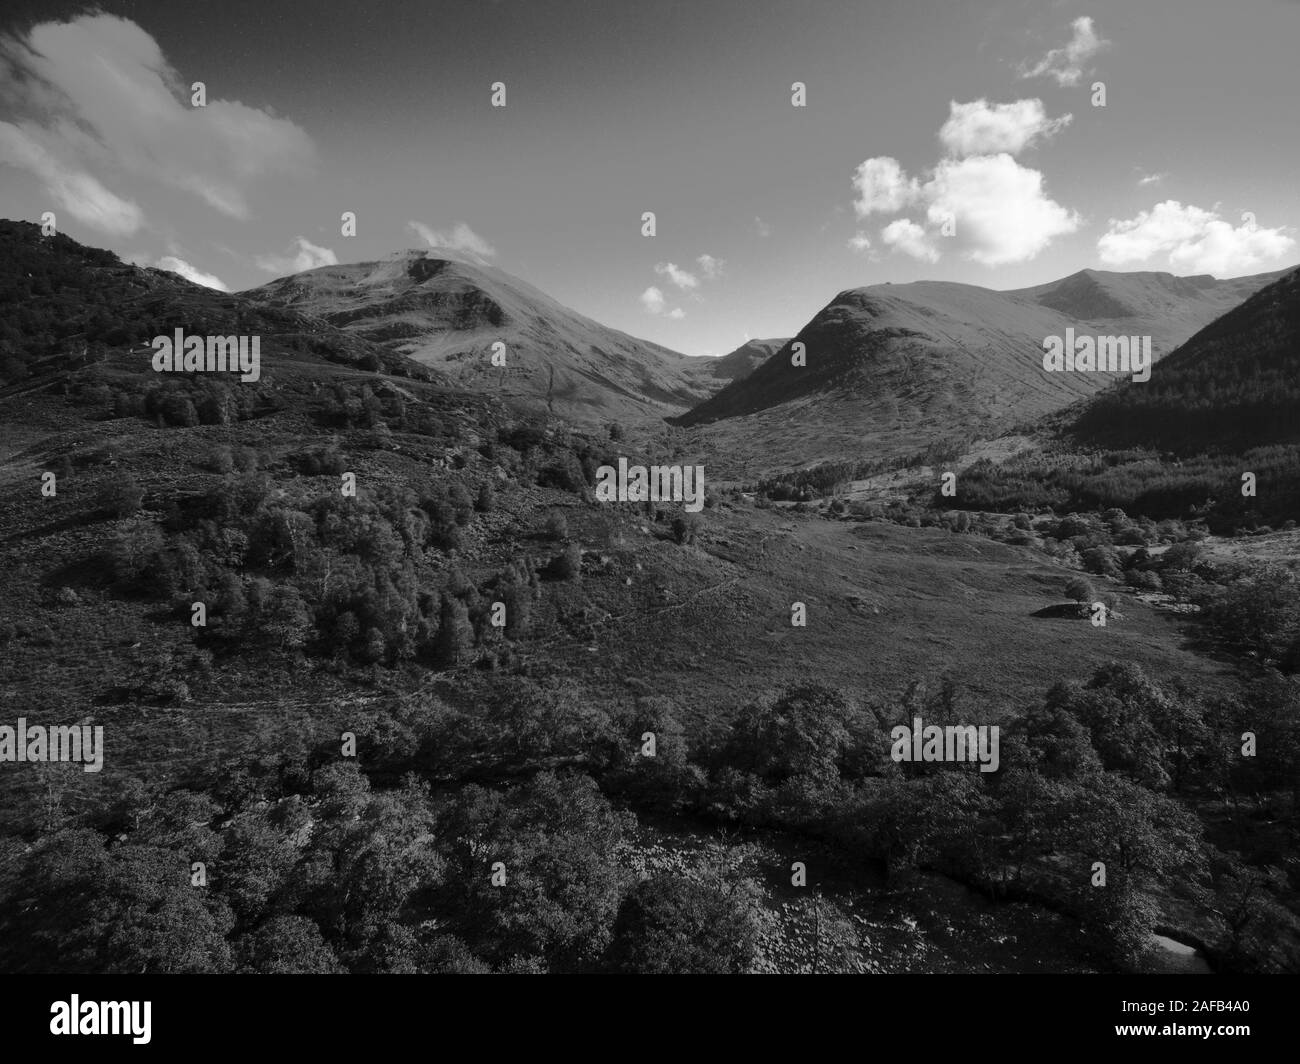 The peak of Sgurr Choinnich Mor (left) next to Ben Nevis in the Grey Corries of the Scottish Highlands Scotland UK Stock Photo